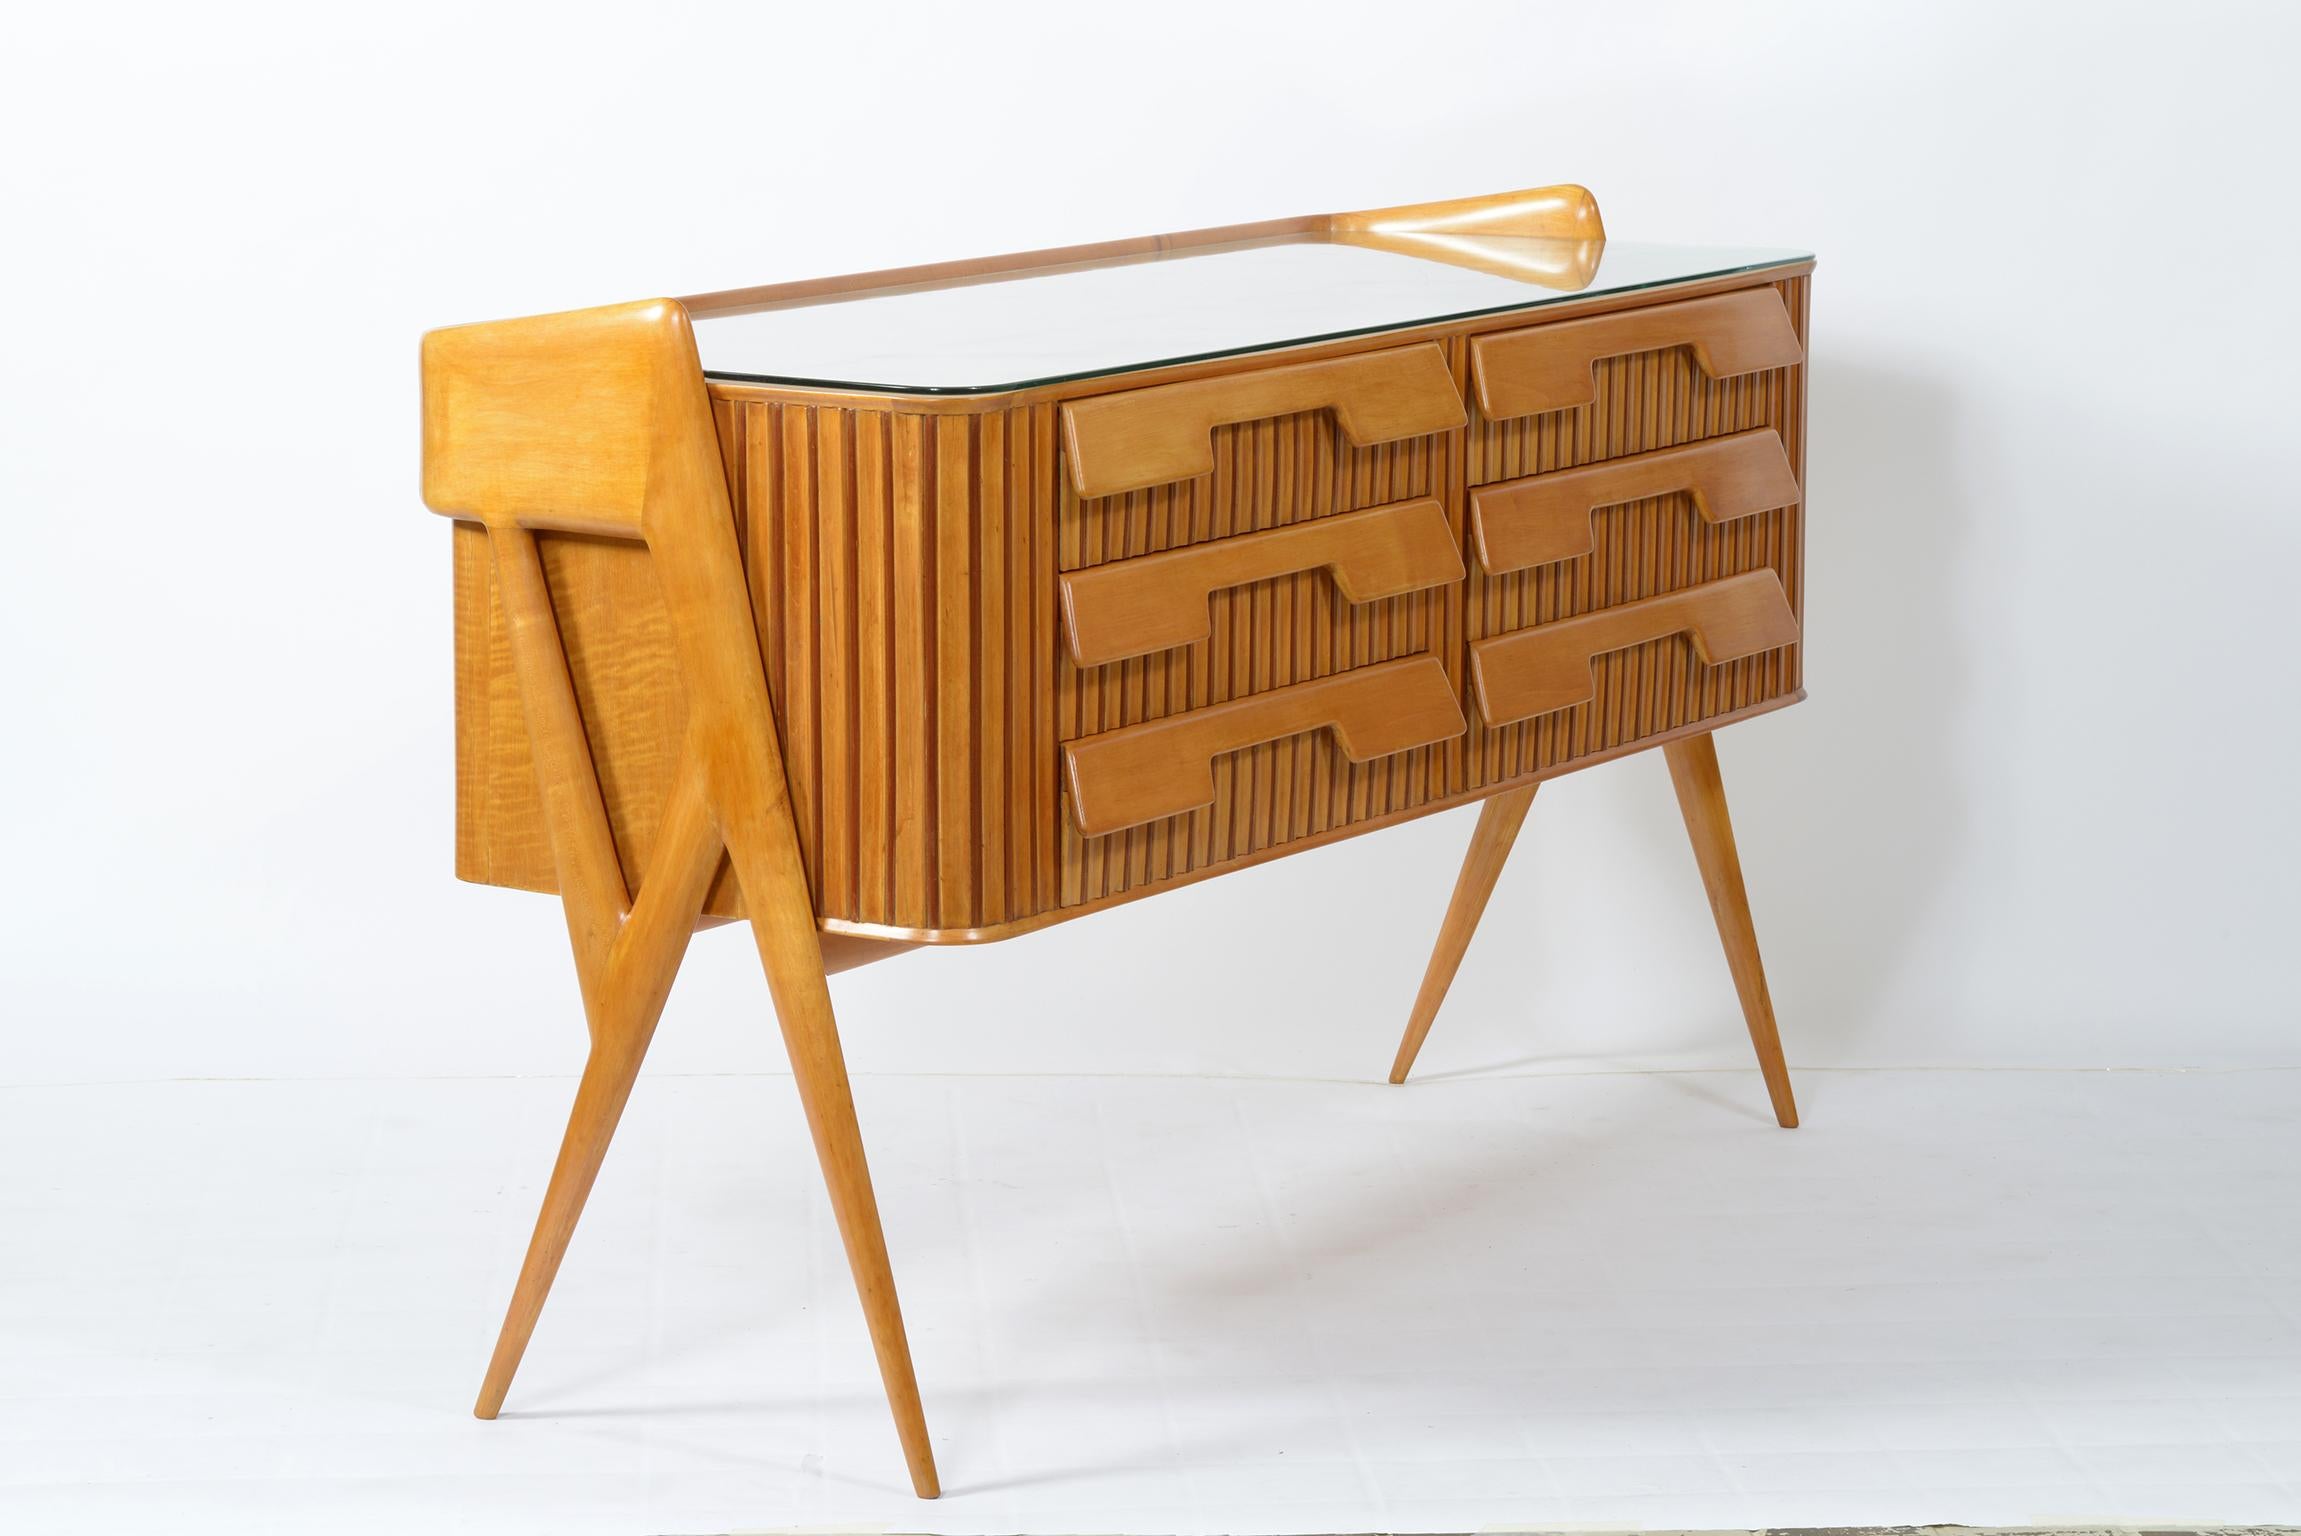 1950s Italian chest of drawers designed and produced by Manufacture Cavatorta Roma in solid maple carved grooved body with six protruding sculpted drawers to make decoration and handle. The four very thin legs that end in a pointed shape make this